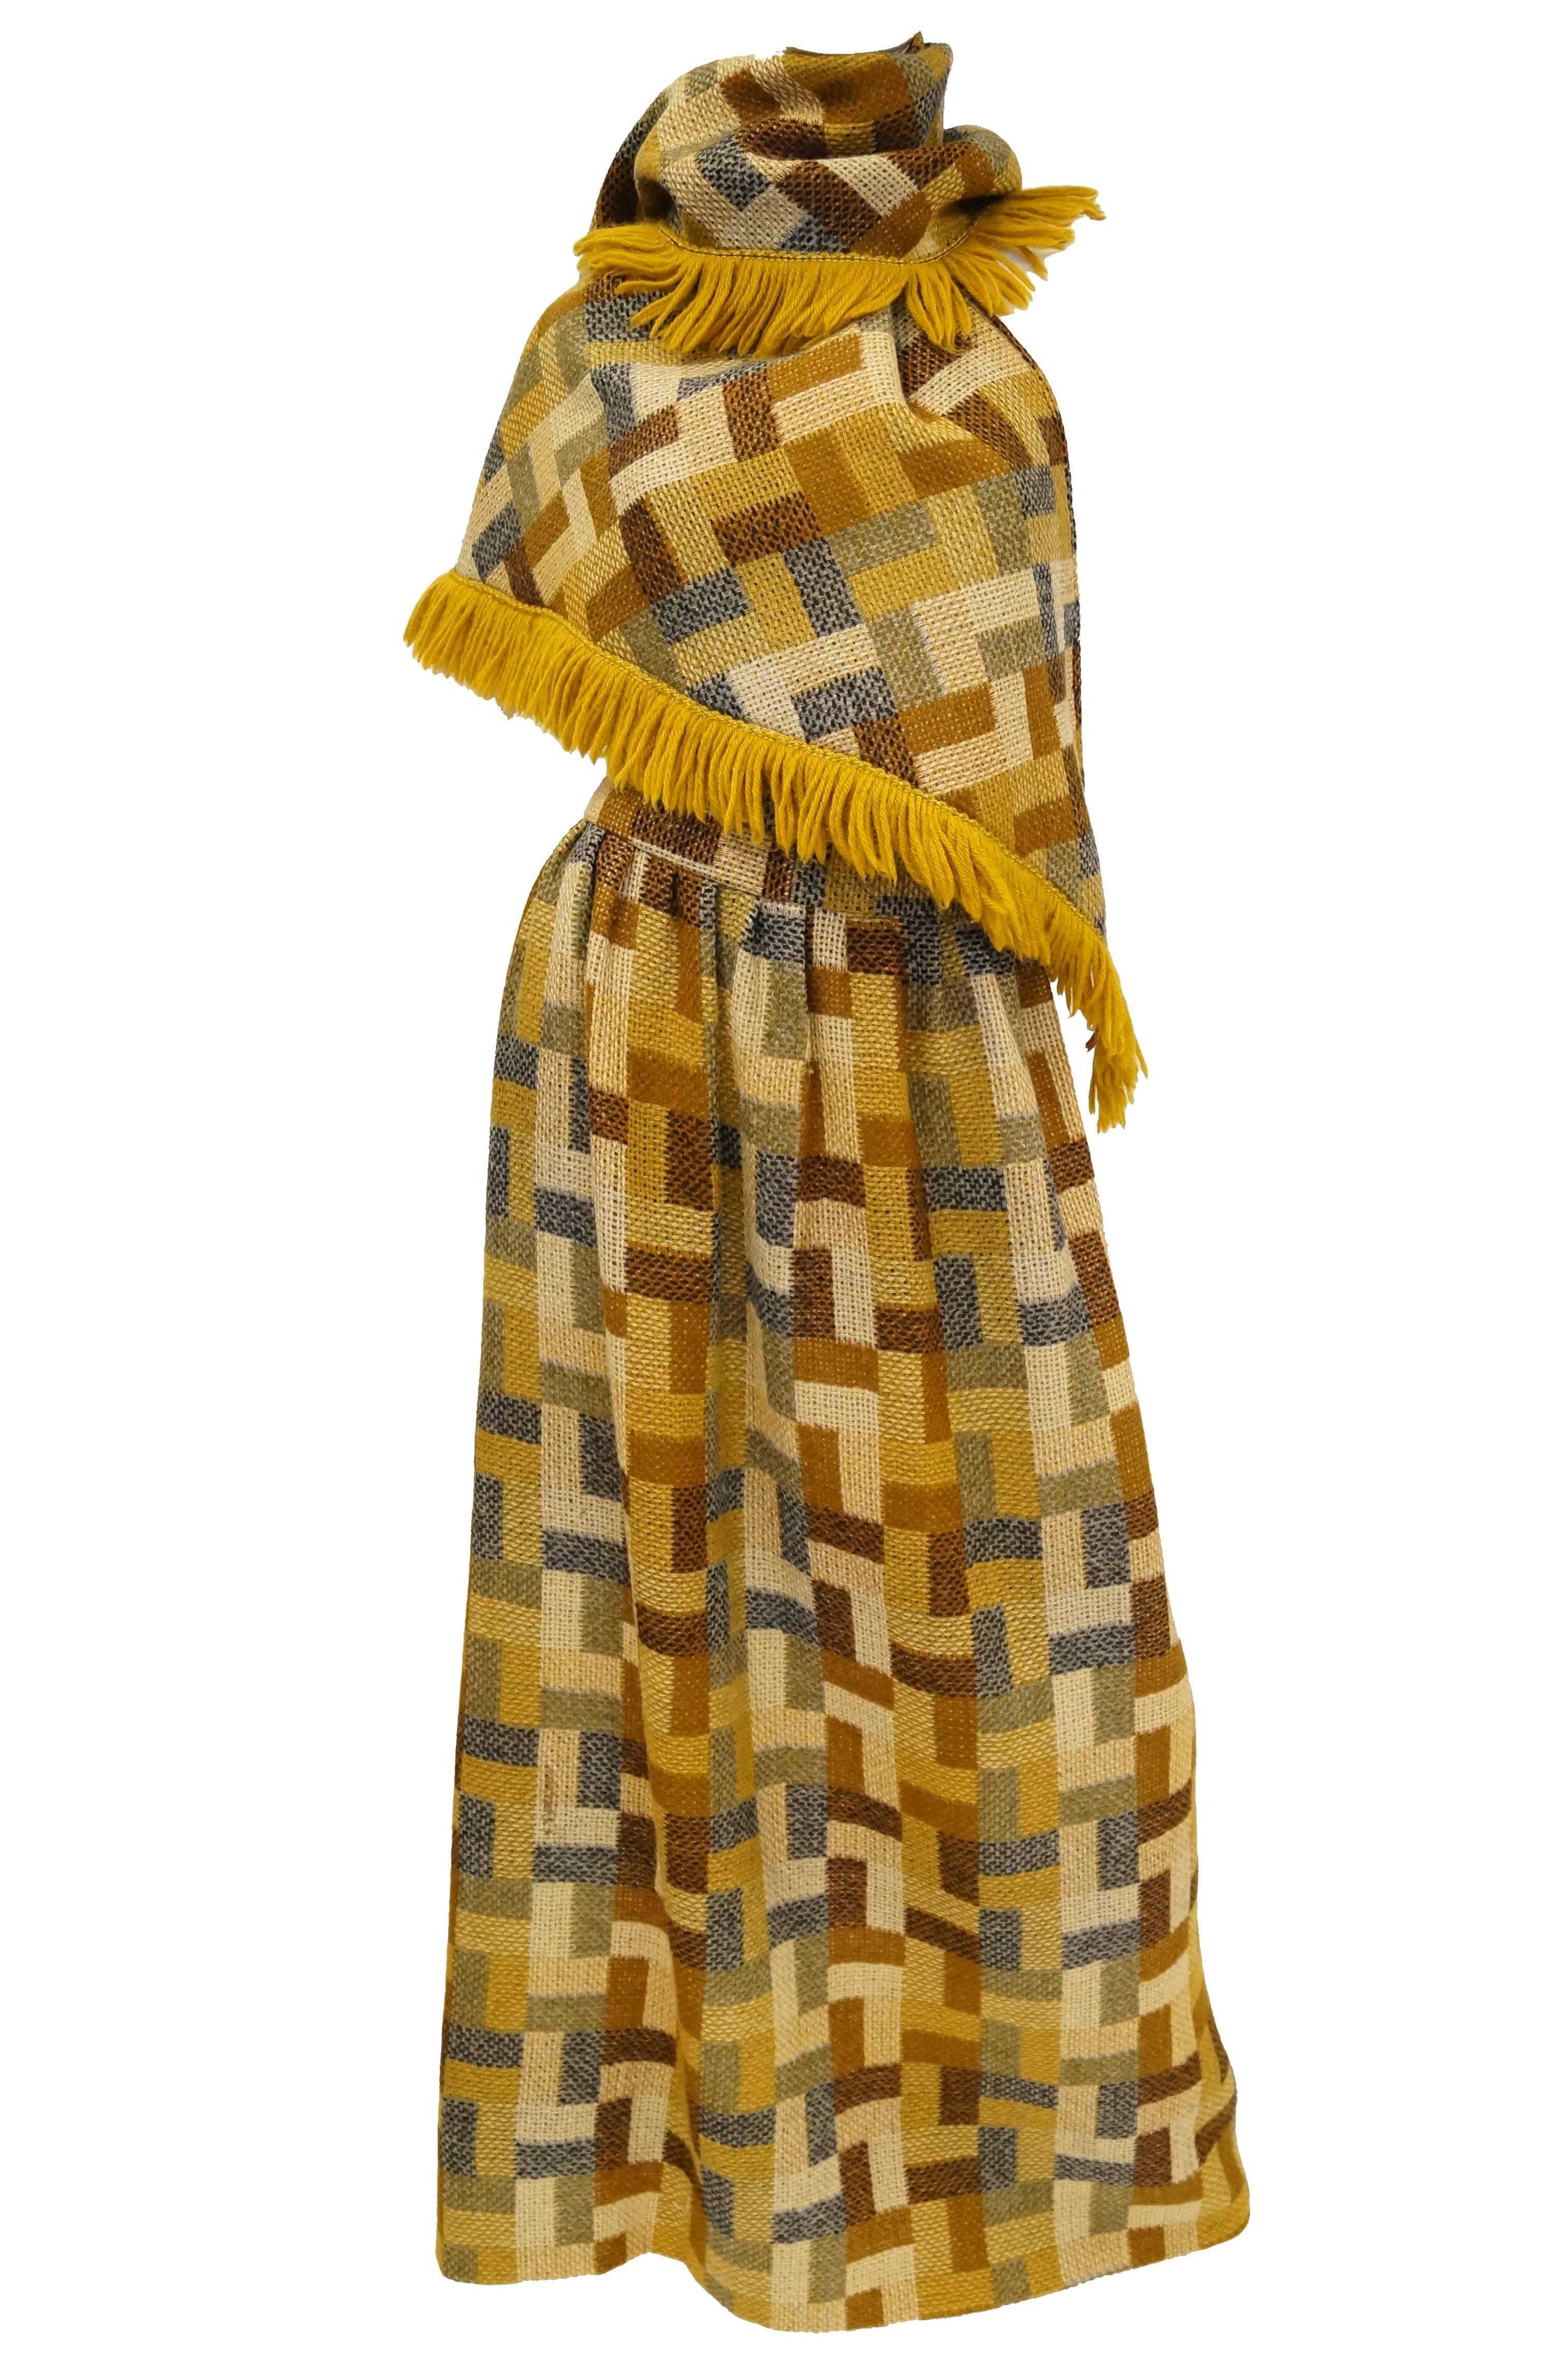 Beautiful woven skirt and matching shawl in amber tones! This ensemble features a maxi a - line skirt with wide waist band, as well as a triangular gold - fringed shawl. The fabric is loosely woven wool and is soft to the touch. Skirt is beautifully